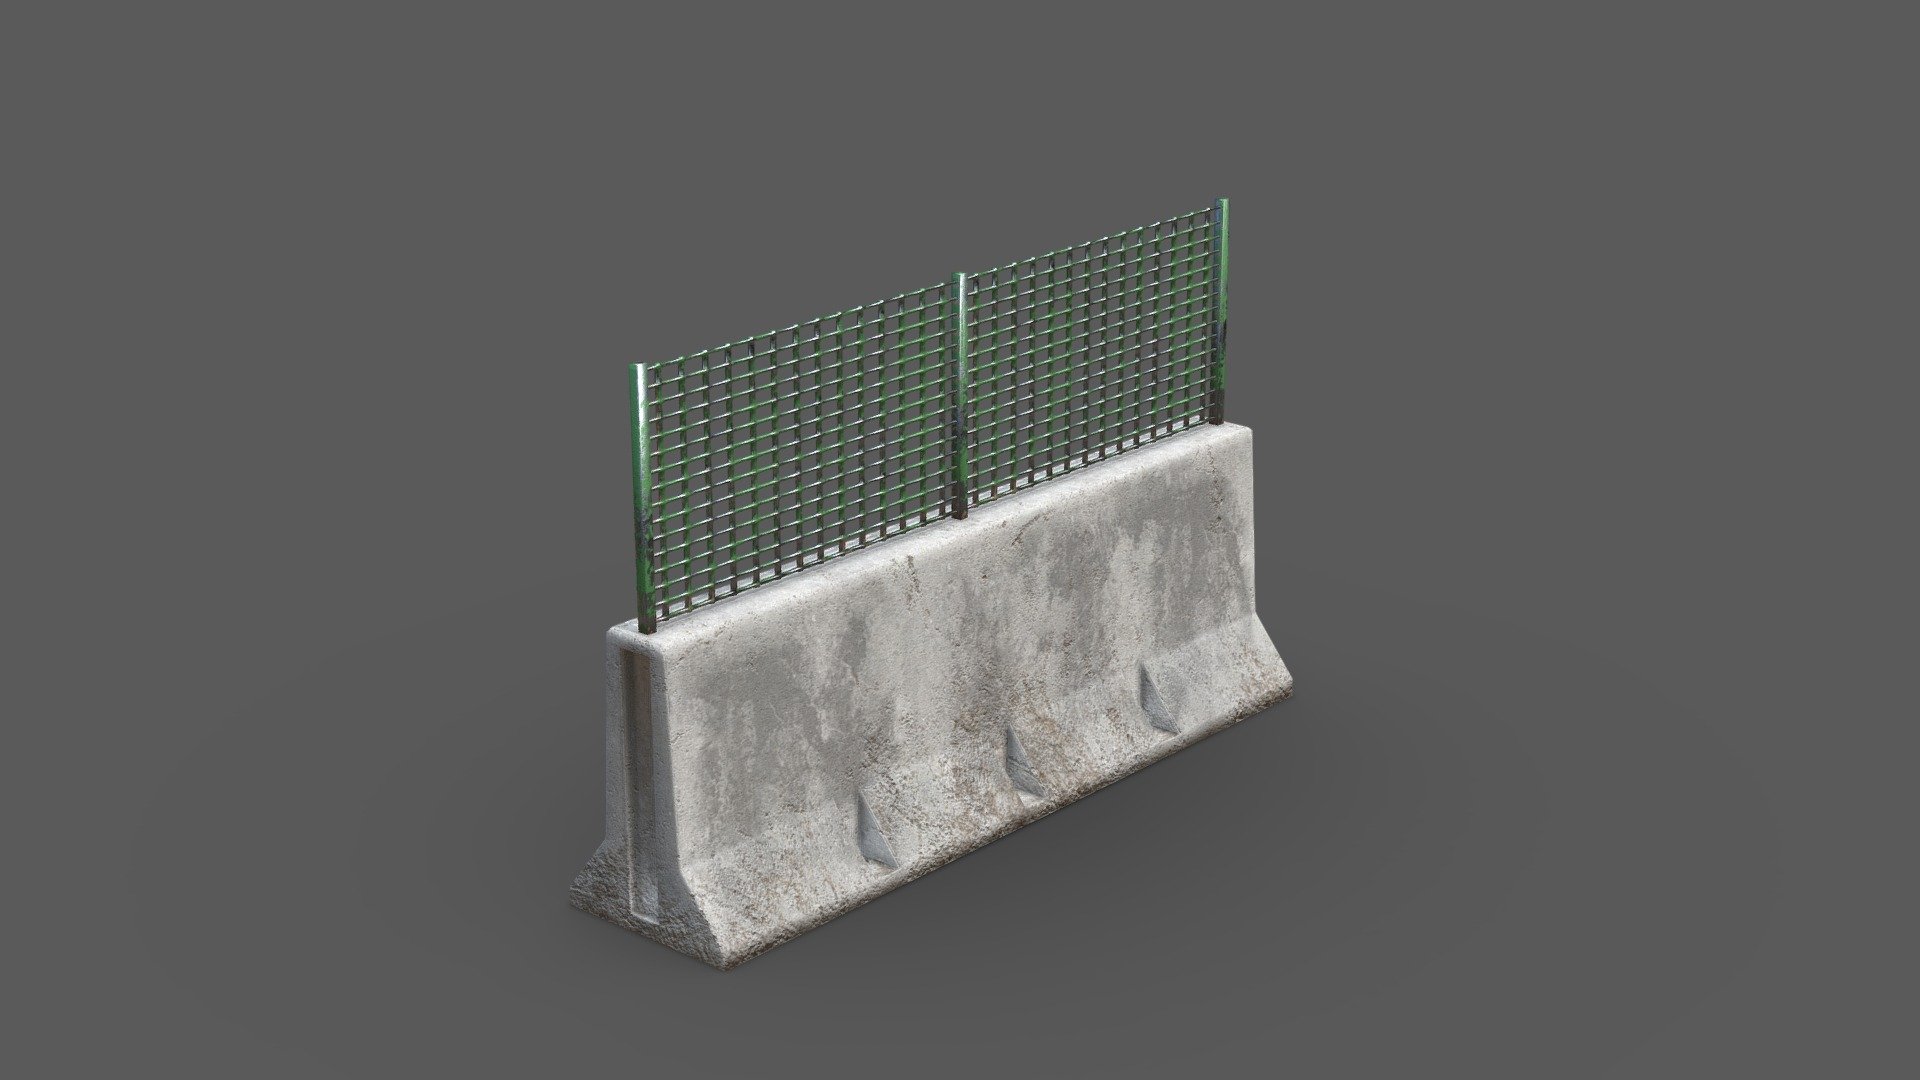 Worn concrete barricade that can be used to block off roads. Worn look to this model with the painted metal rusting and fading. The concrete is stained.

Simple low poly design makes this a perfect fit into any project - Concrete Barricade - 3D model by Joe-Wall (@Aceofjoey) 3d model